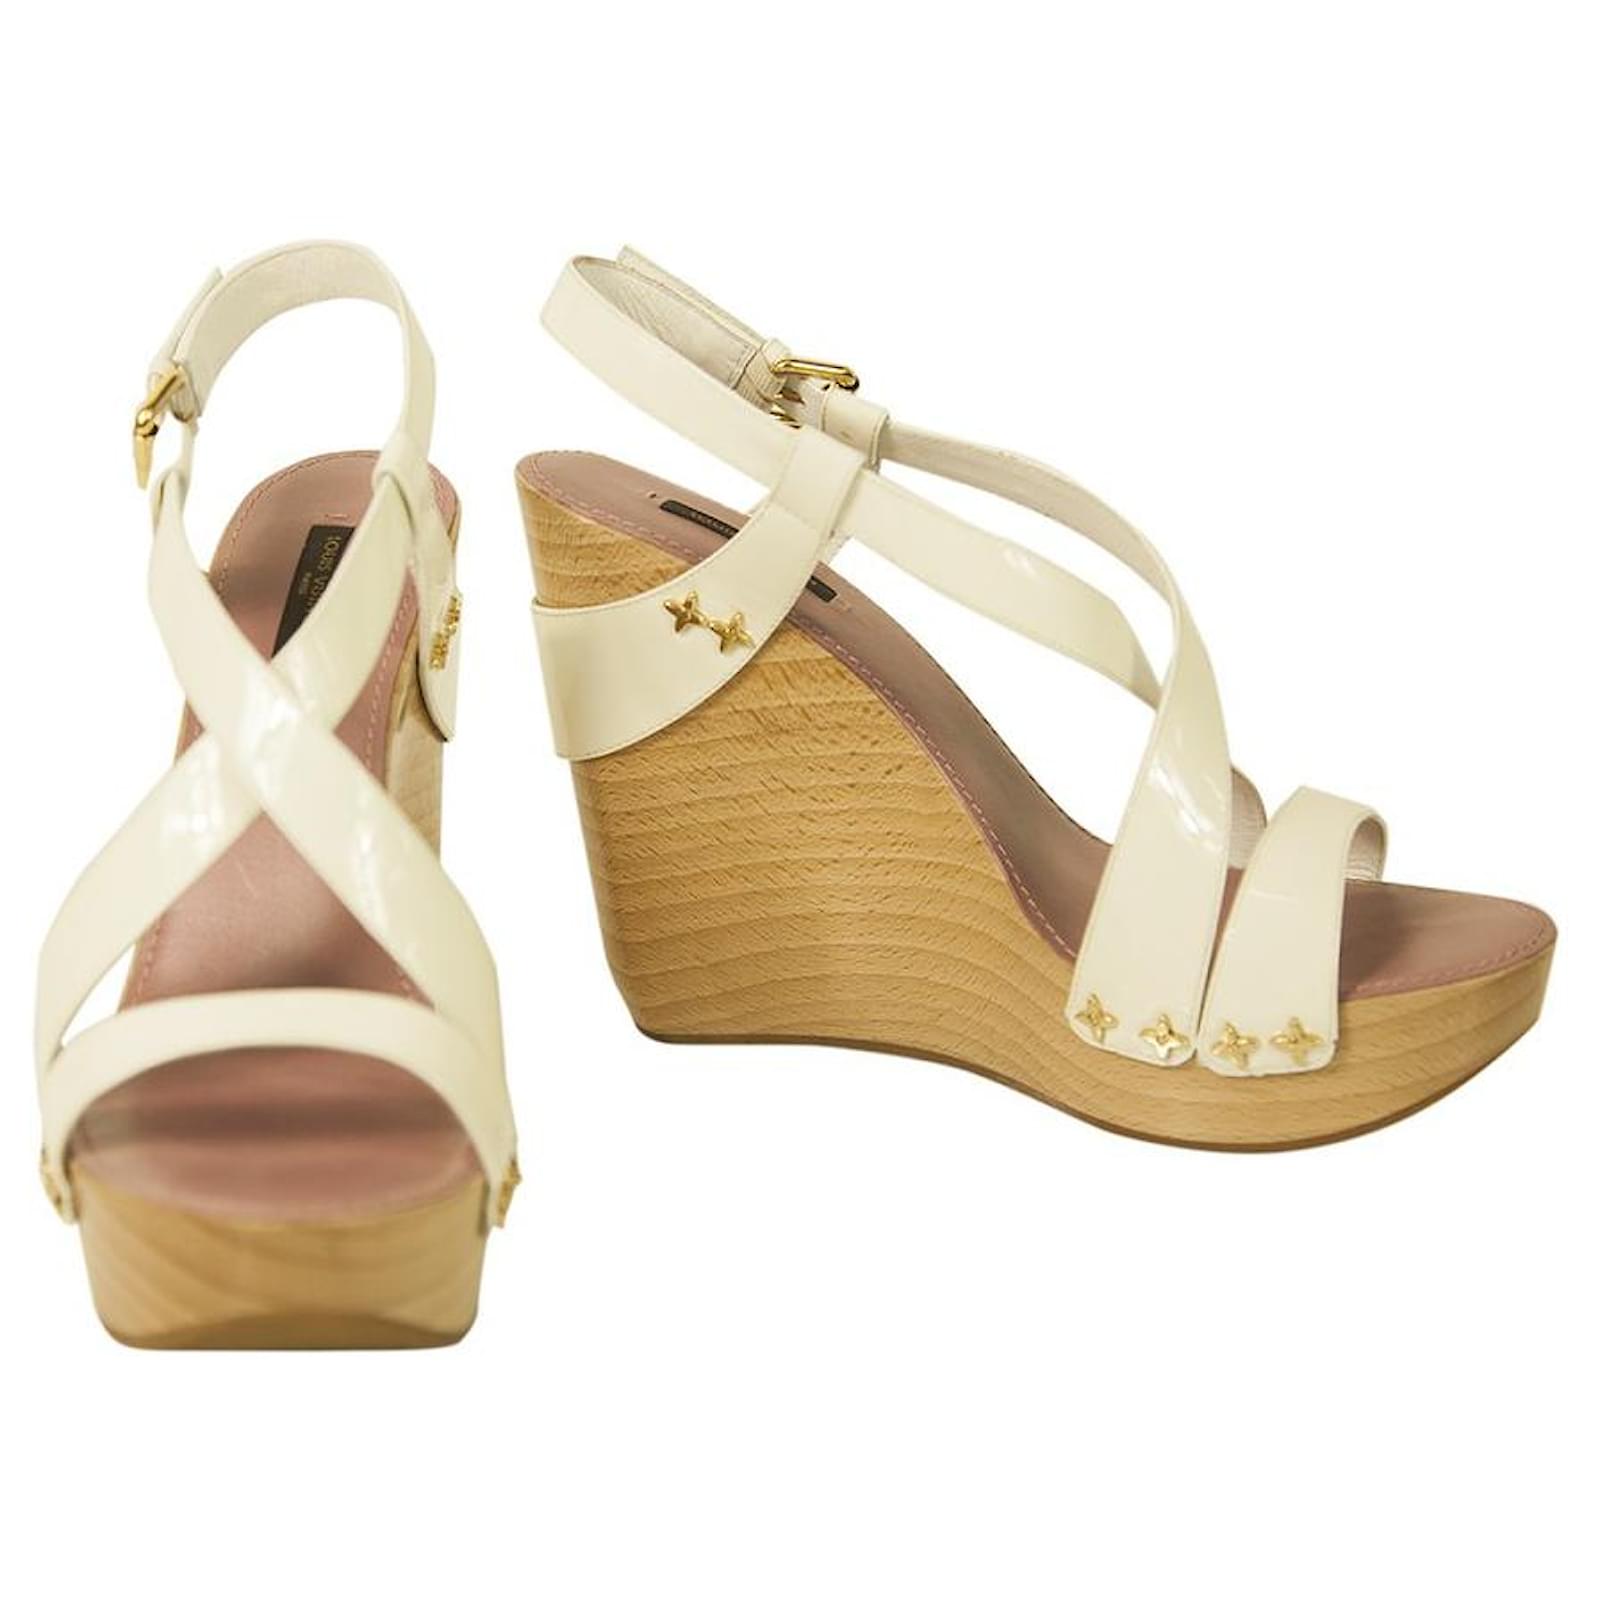 Louis Vuitton, Shoes, Women Louise Vuitton Wedge Heel With Cross Straps  Brand New Size 4